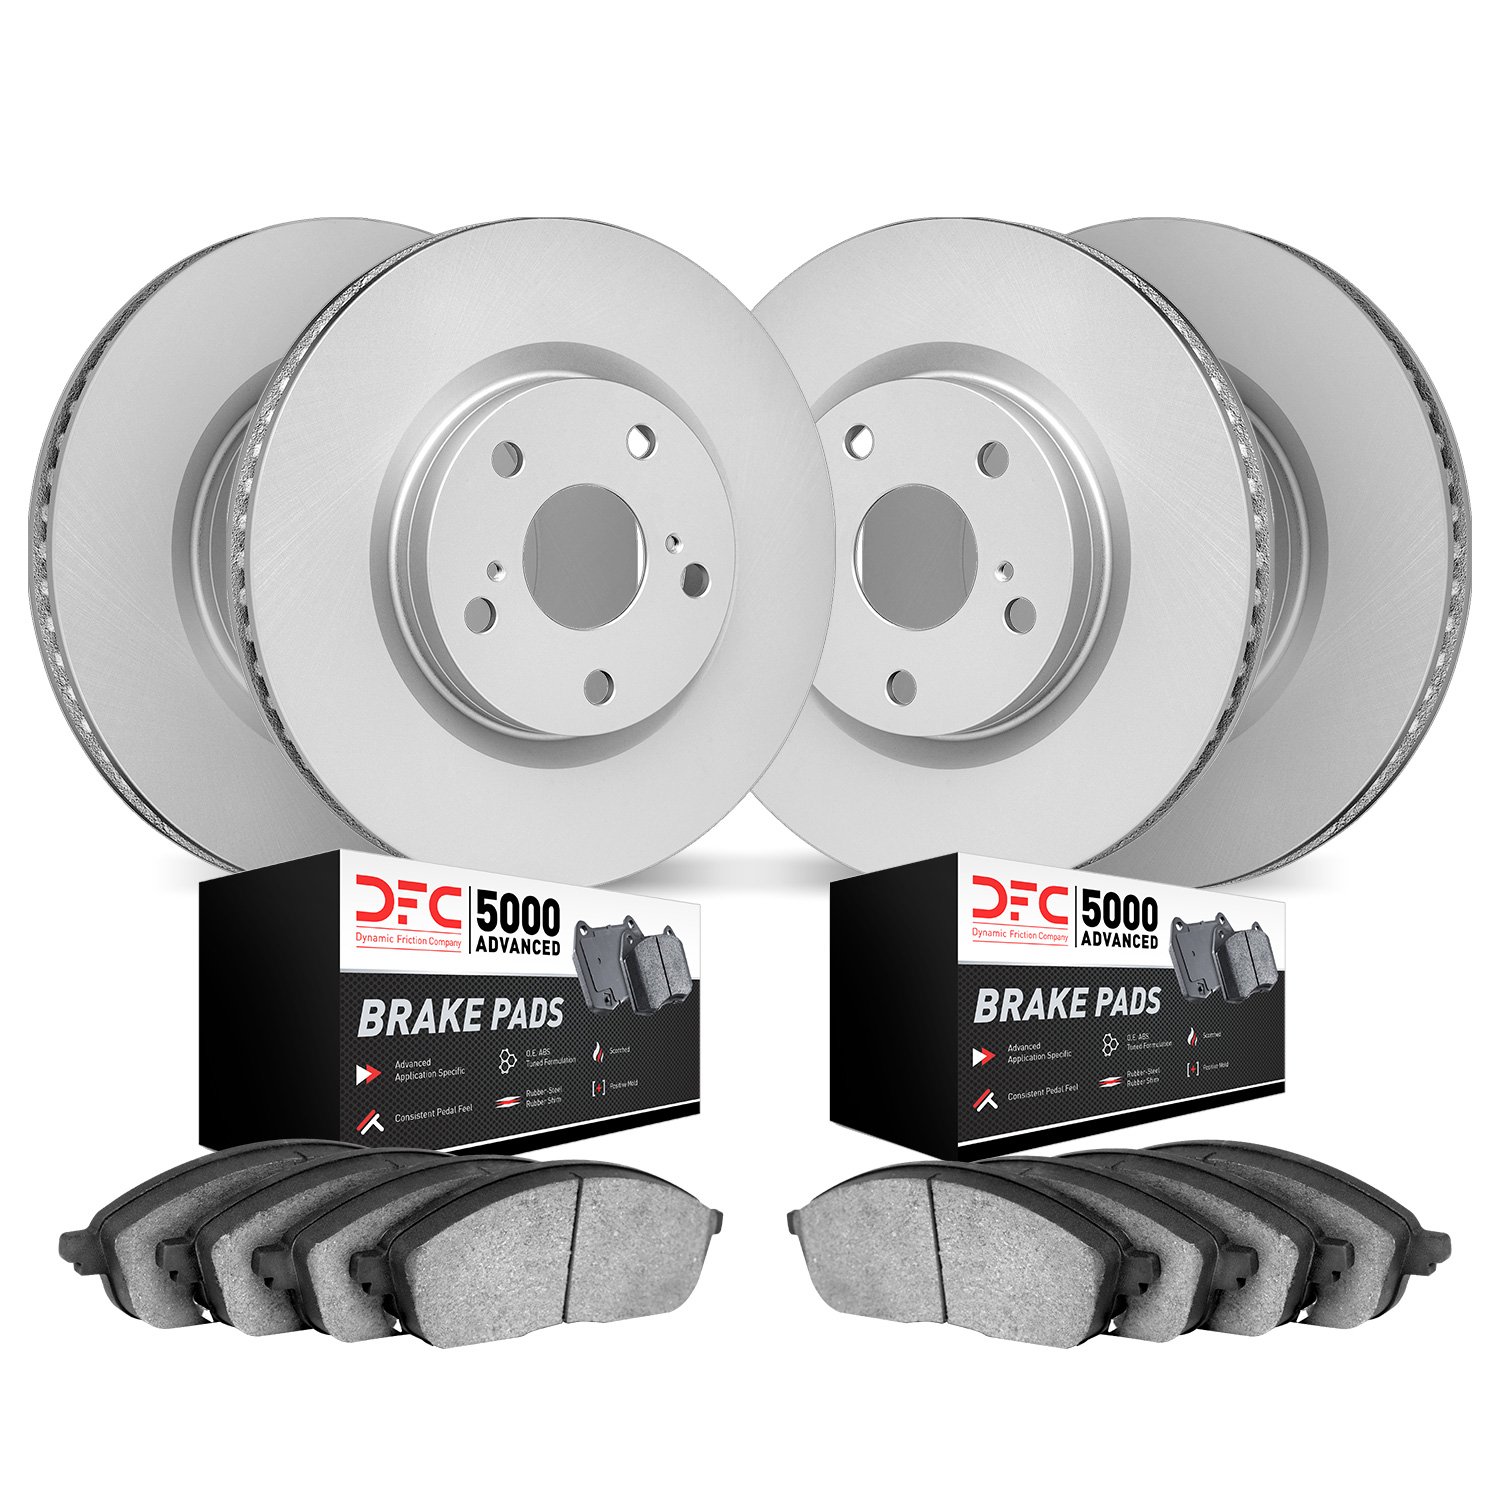 4504-47005 Geospec Brake Rotors w/5000 Advanced Brake Pads Kit, 1993-1993 GM, Position: Front and Rear